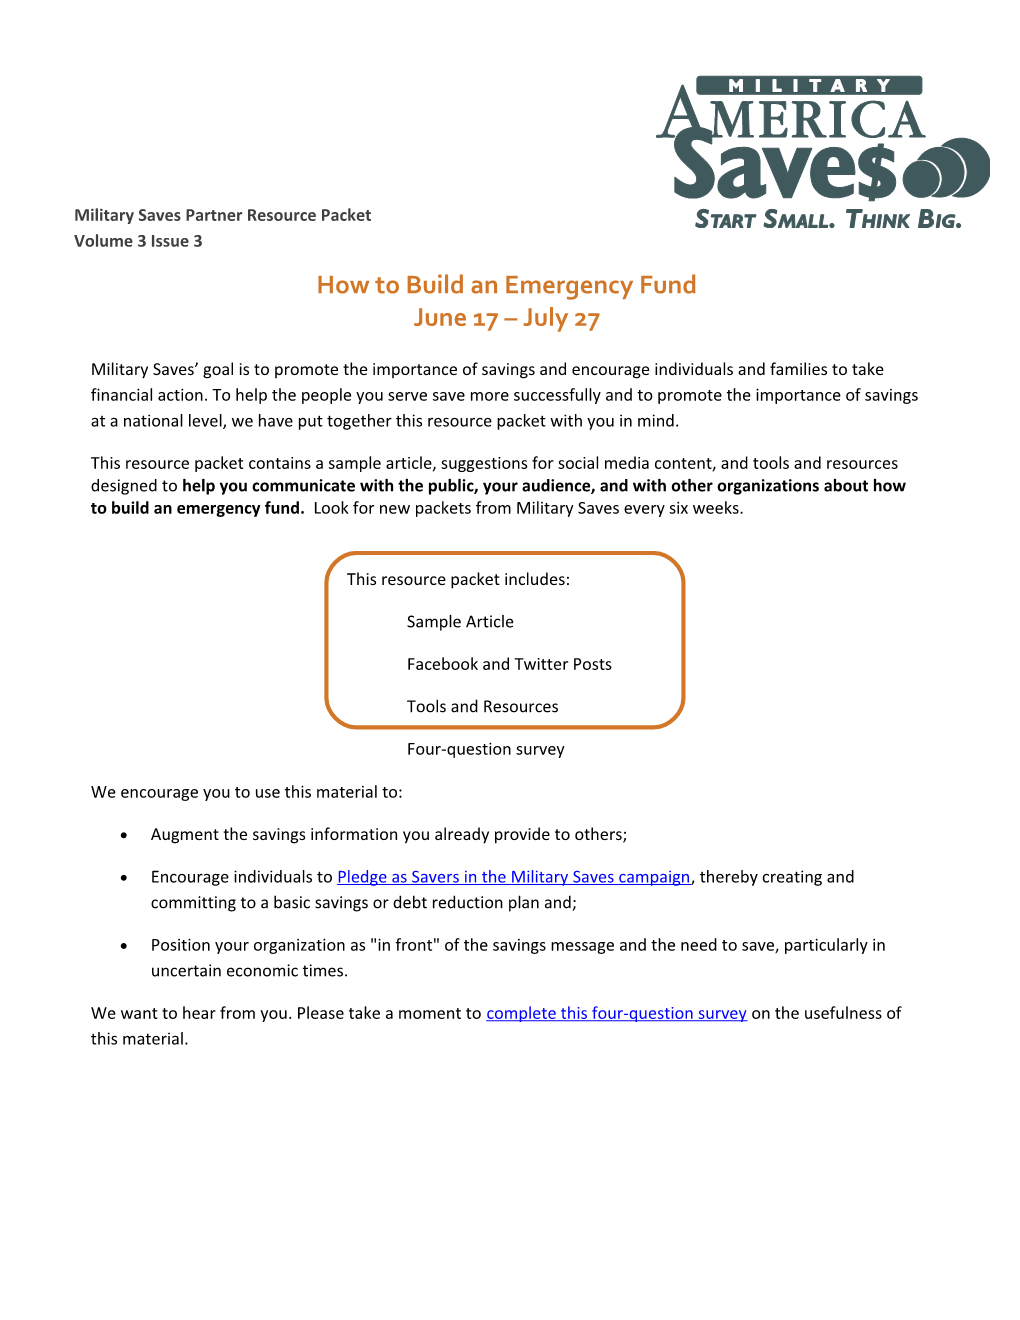 How to Build an Emergency Fund June 17 July 27